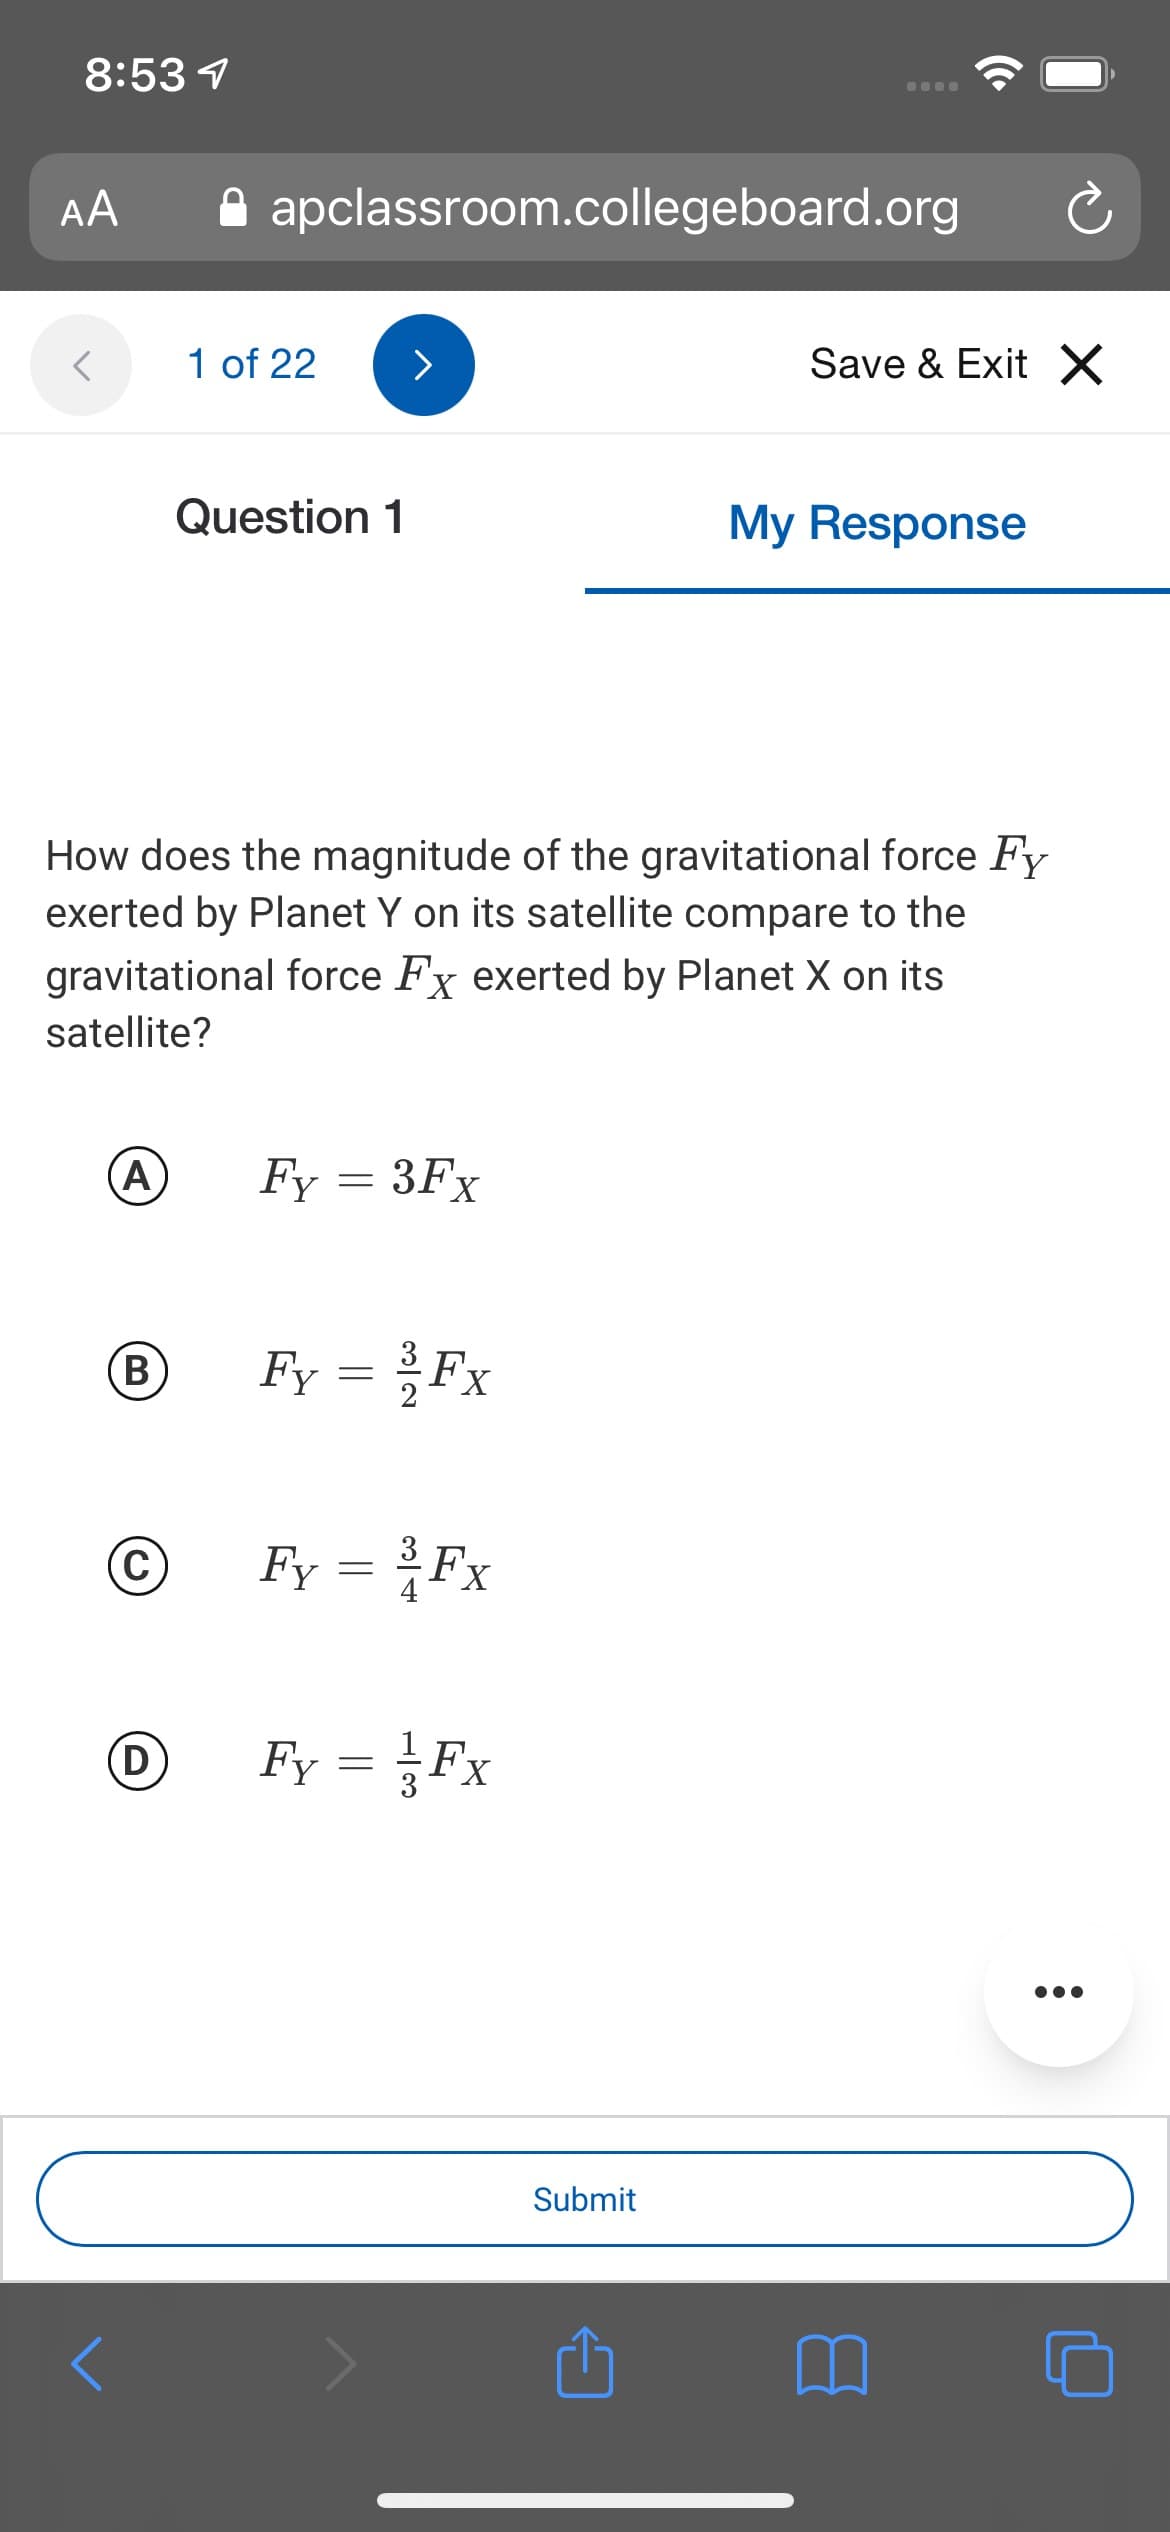 8:53 1
AA
A apclassroom.collegeboard.org
1 of 22
Save & Exit X
Question 1
My Response
How does the magnitude of the gravitational force Fy
exerted by Planet Y on its satellite compare to the
gravitational force Fx exerted by Planet X on its
satellite?
A)
Fy = 3Fx
B
Fy = Fx
C
Fy = Fx
(D
Fy = Fx
Submit
